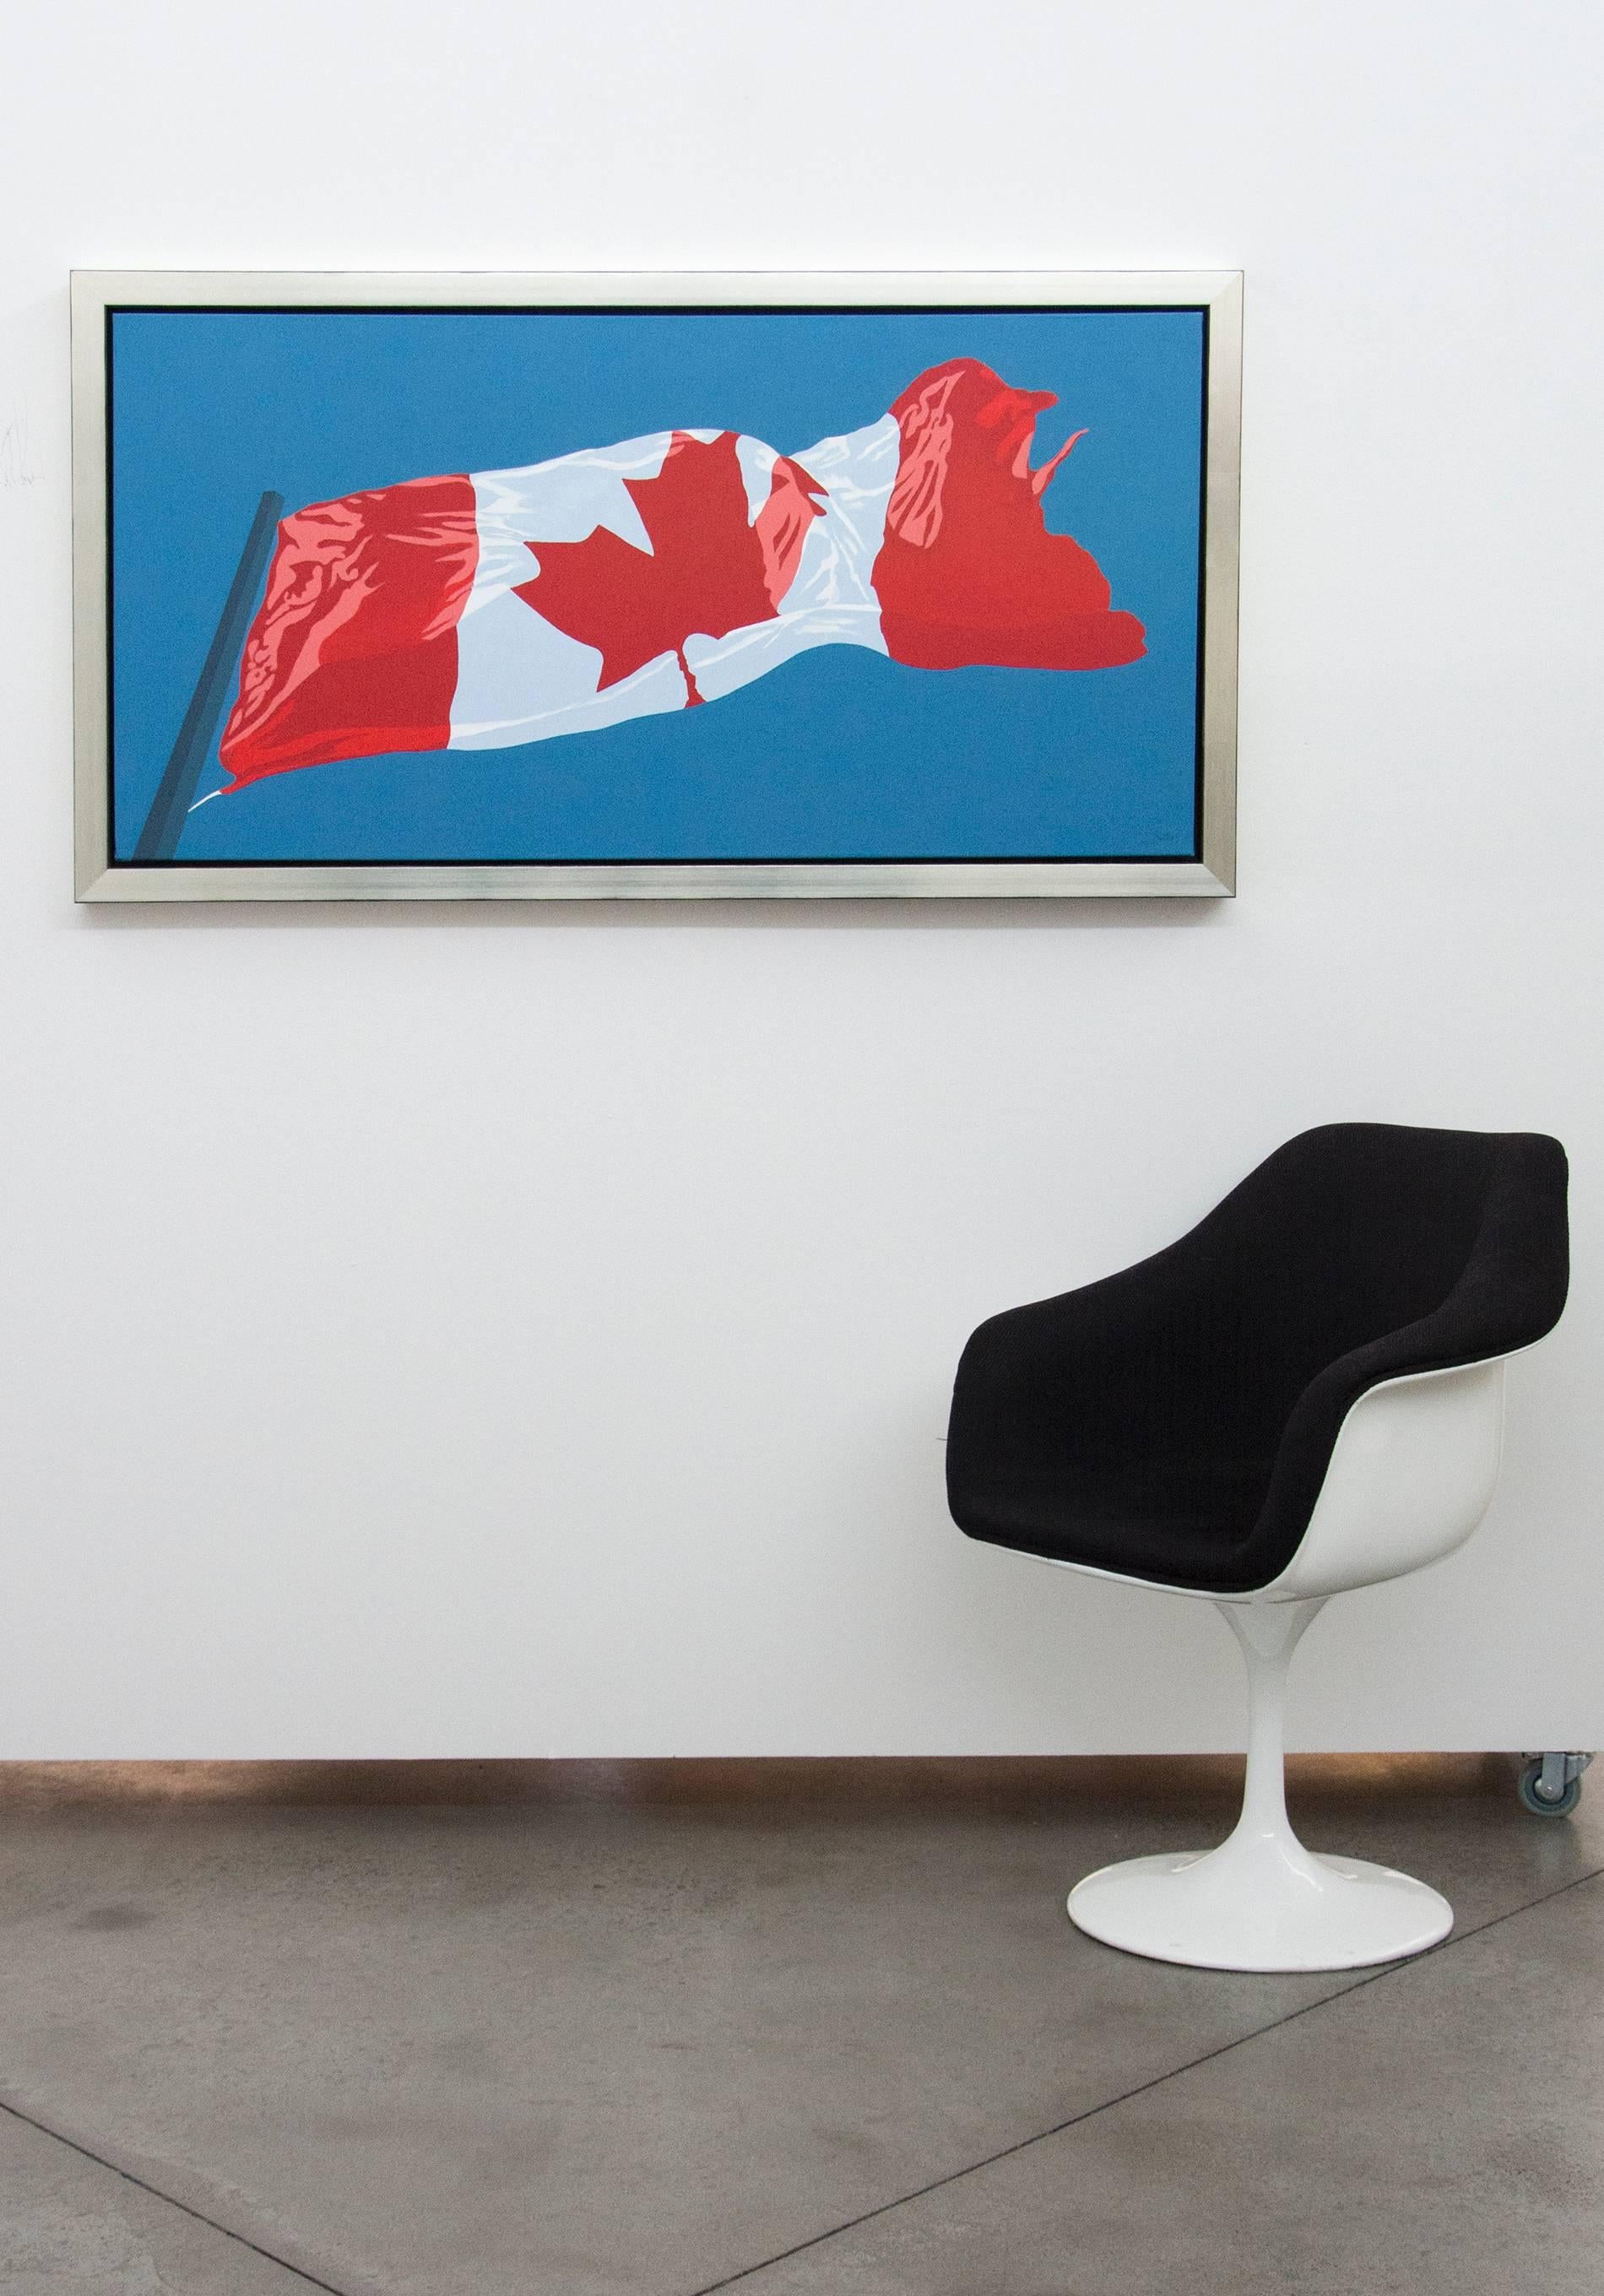 Horizontal Flag - pop-art, Canadiana, iconic, contemporary, acrylic on canvas - Painting by Charles Pachter